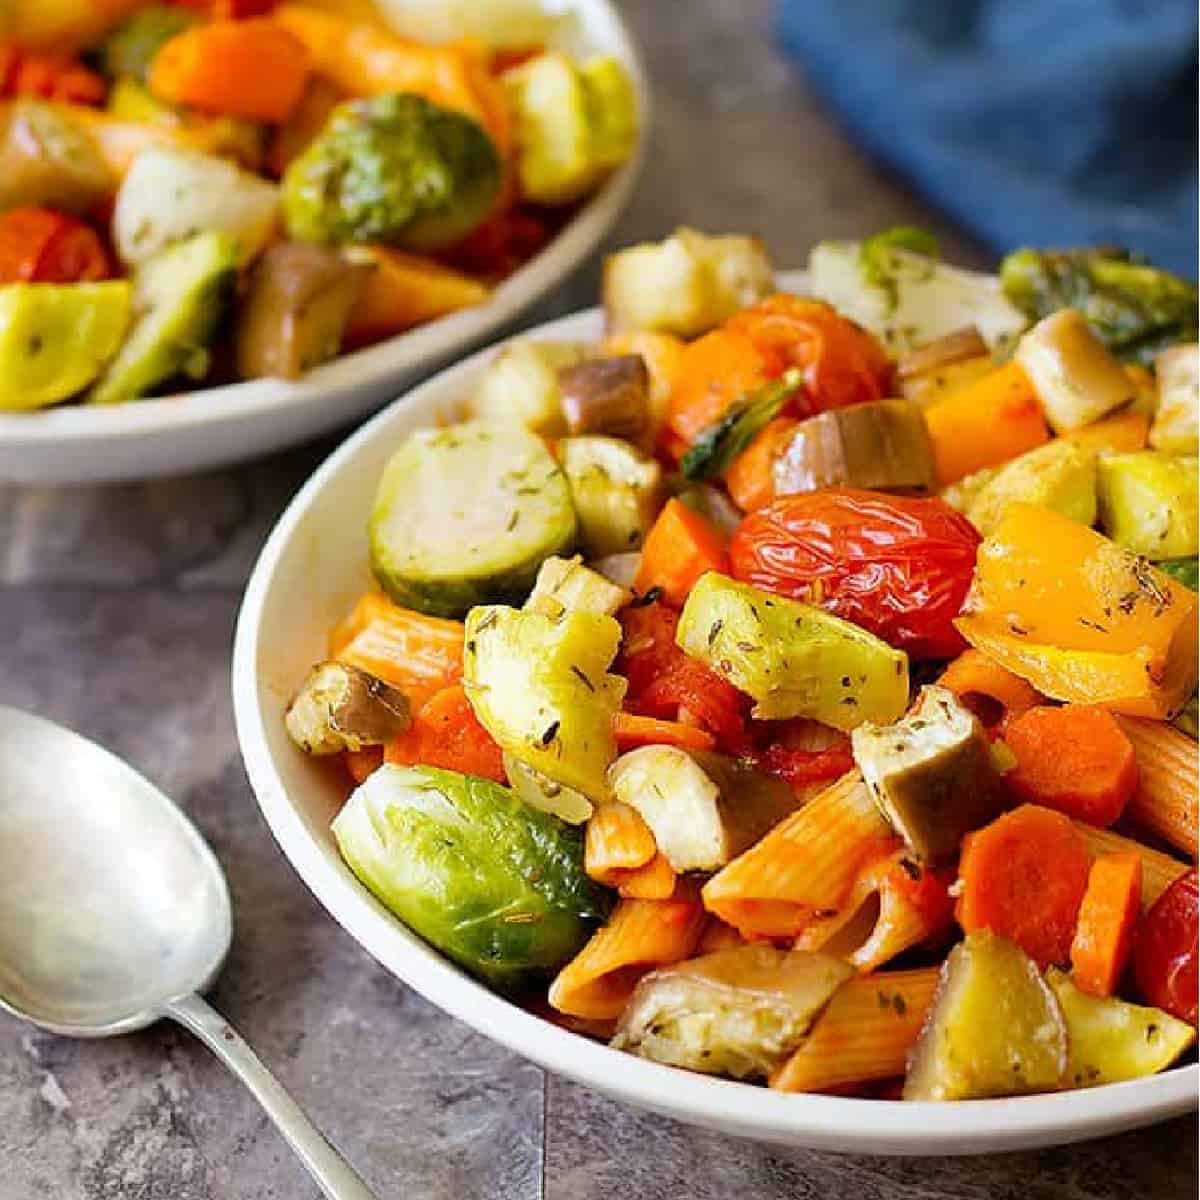 Roasted vegetable pasta is a delicious weeknight meal that's bursting with amazing flavors. This vegetarian pasta recipe is easy, quick and perfect for a family meal. 
